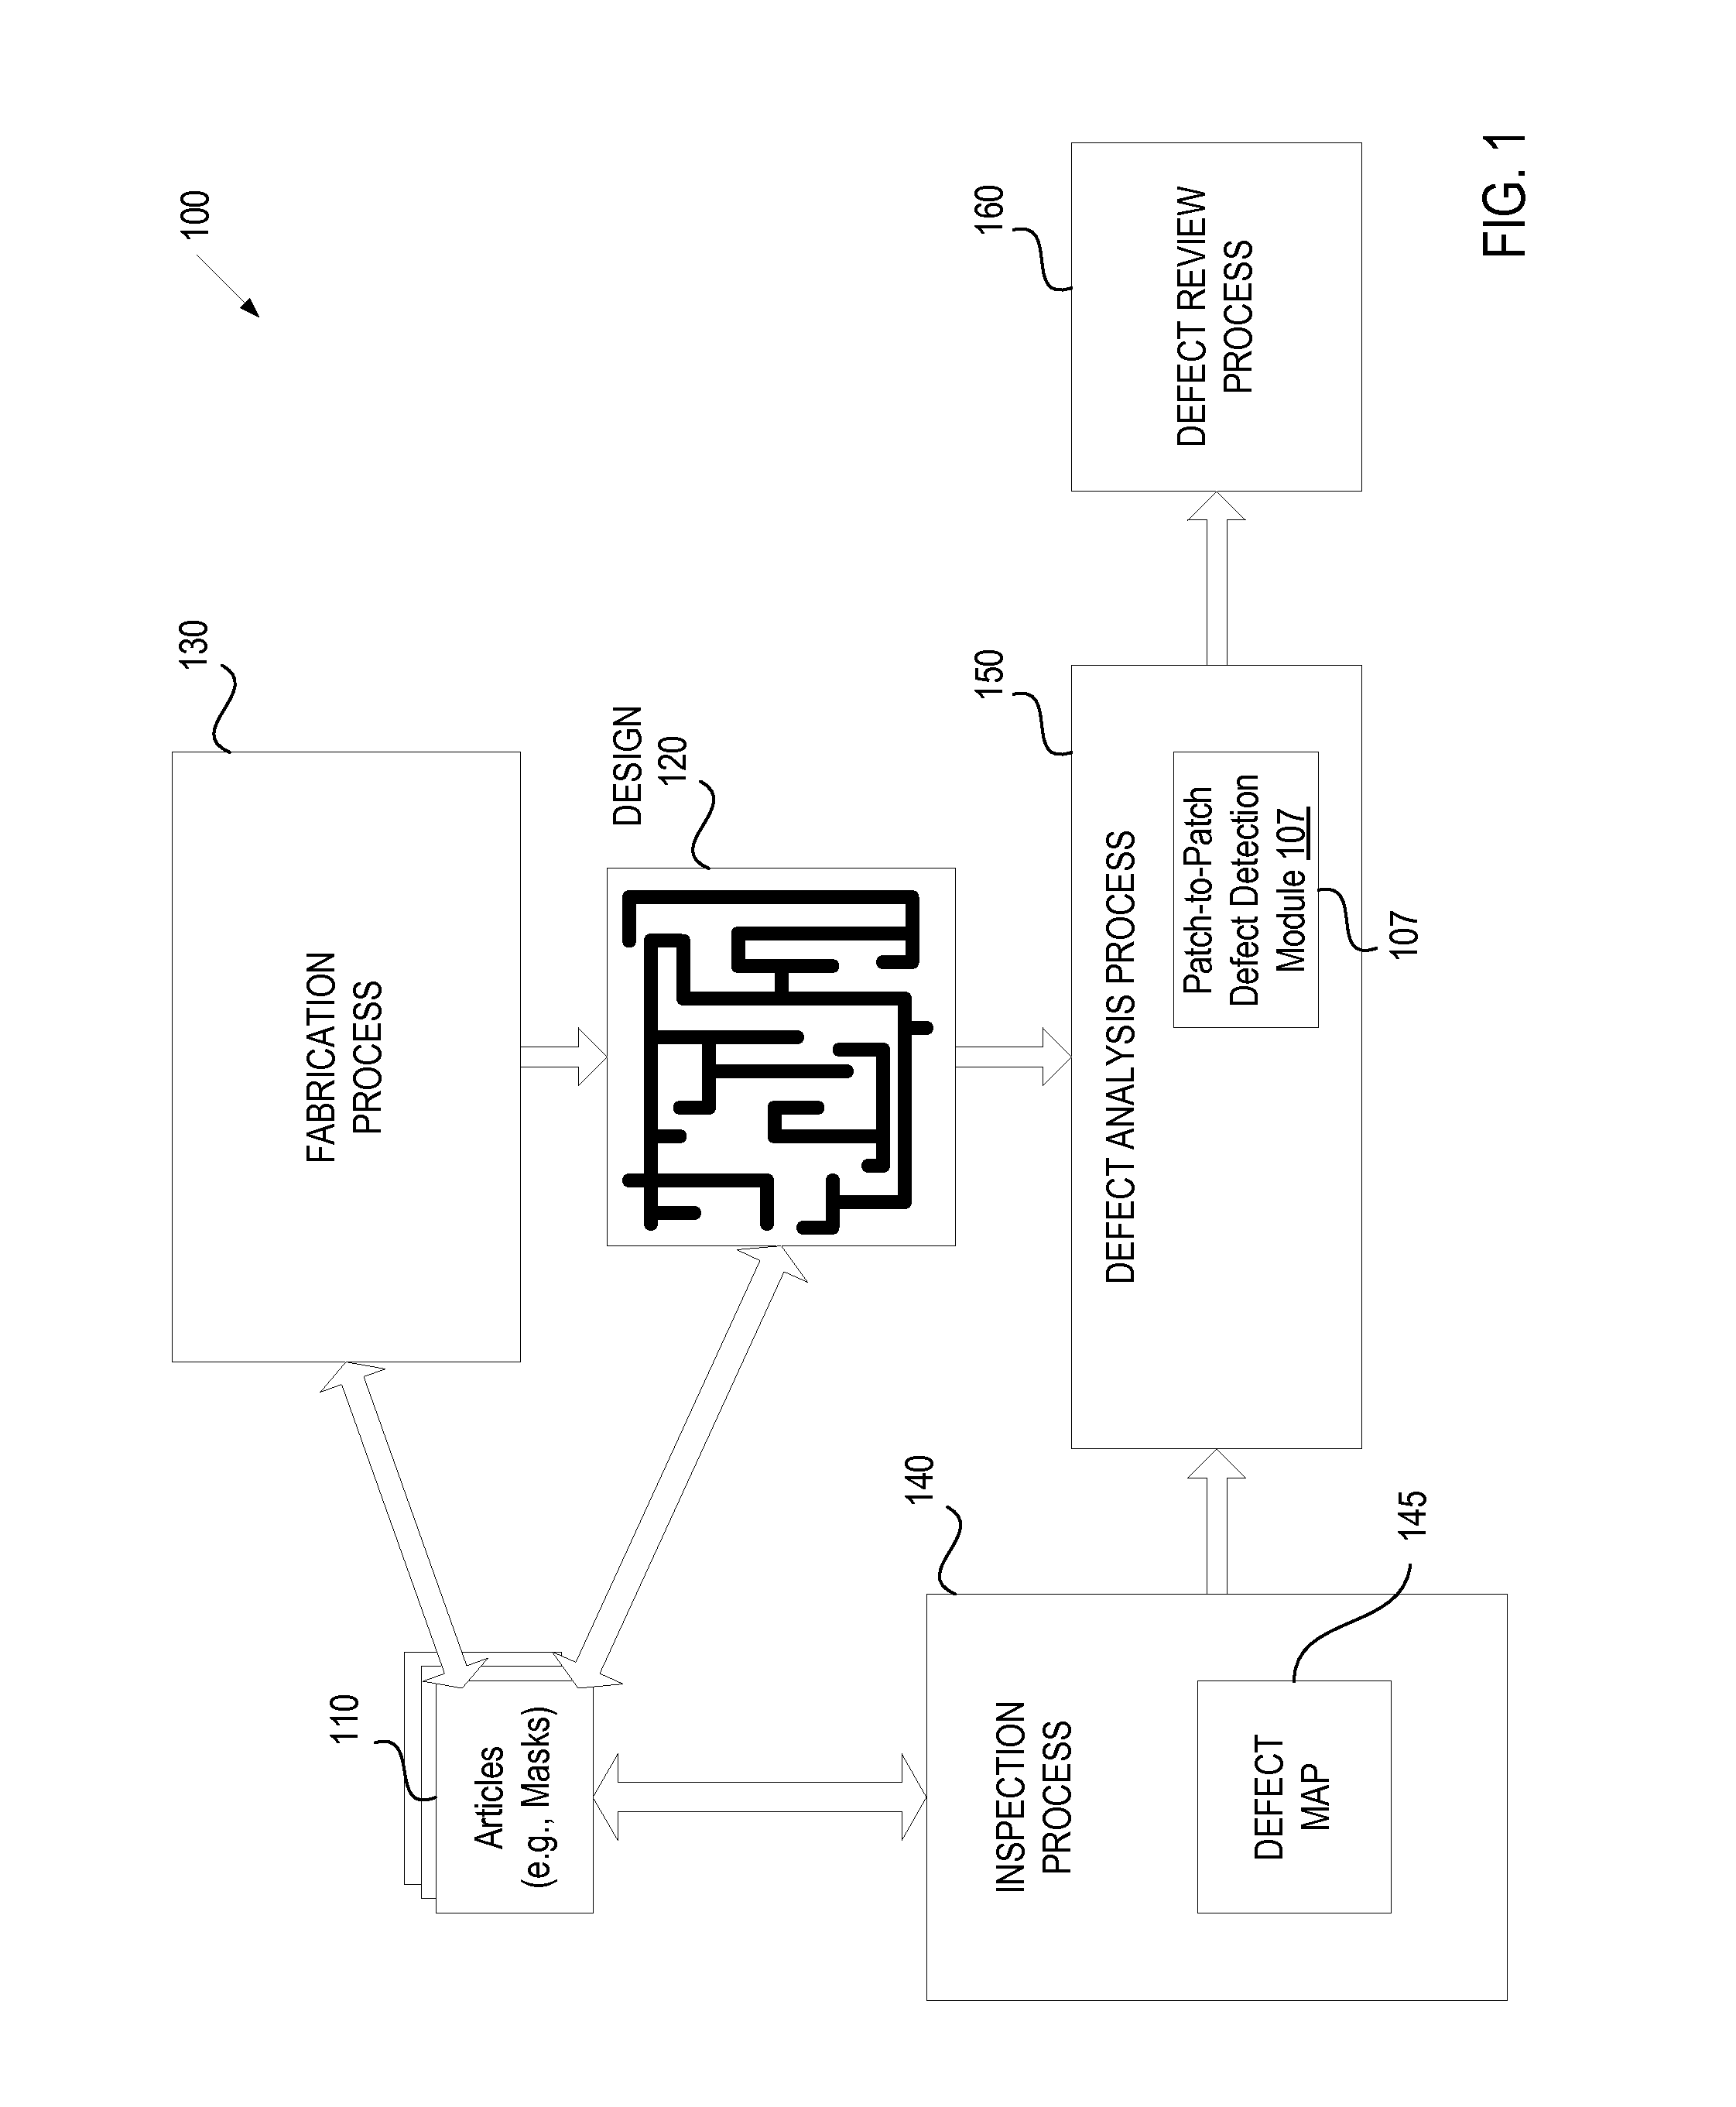 Apparatus and method for defect detection including patch-to-patch comparisons